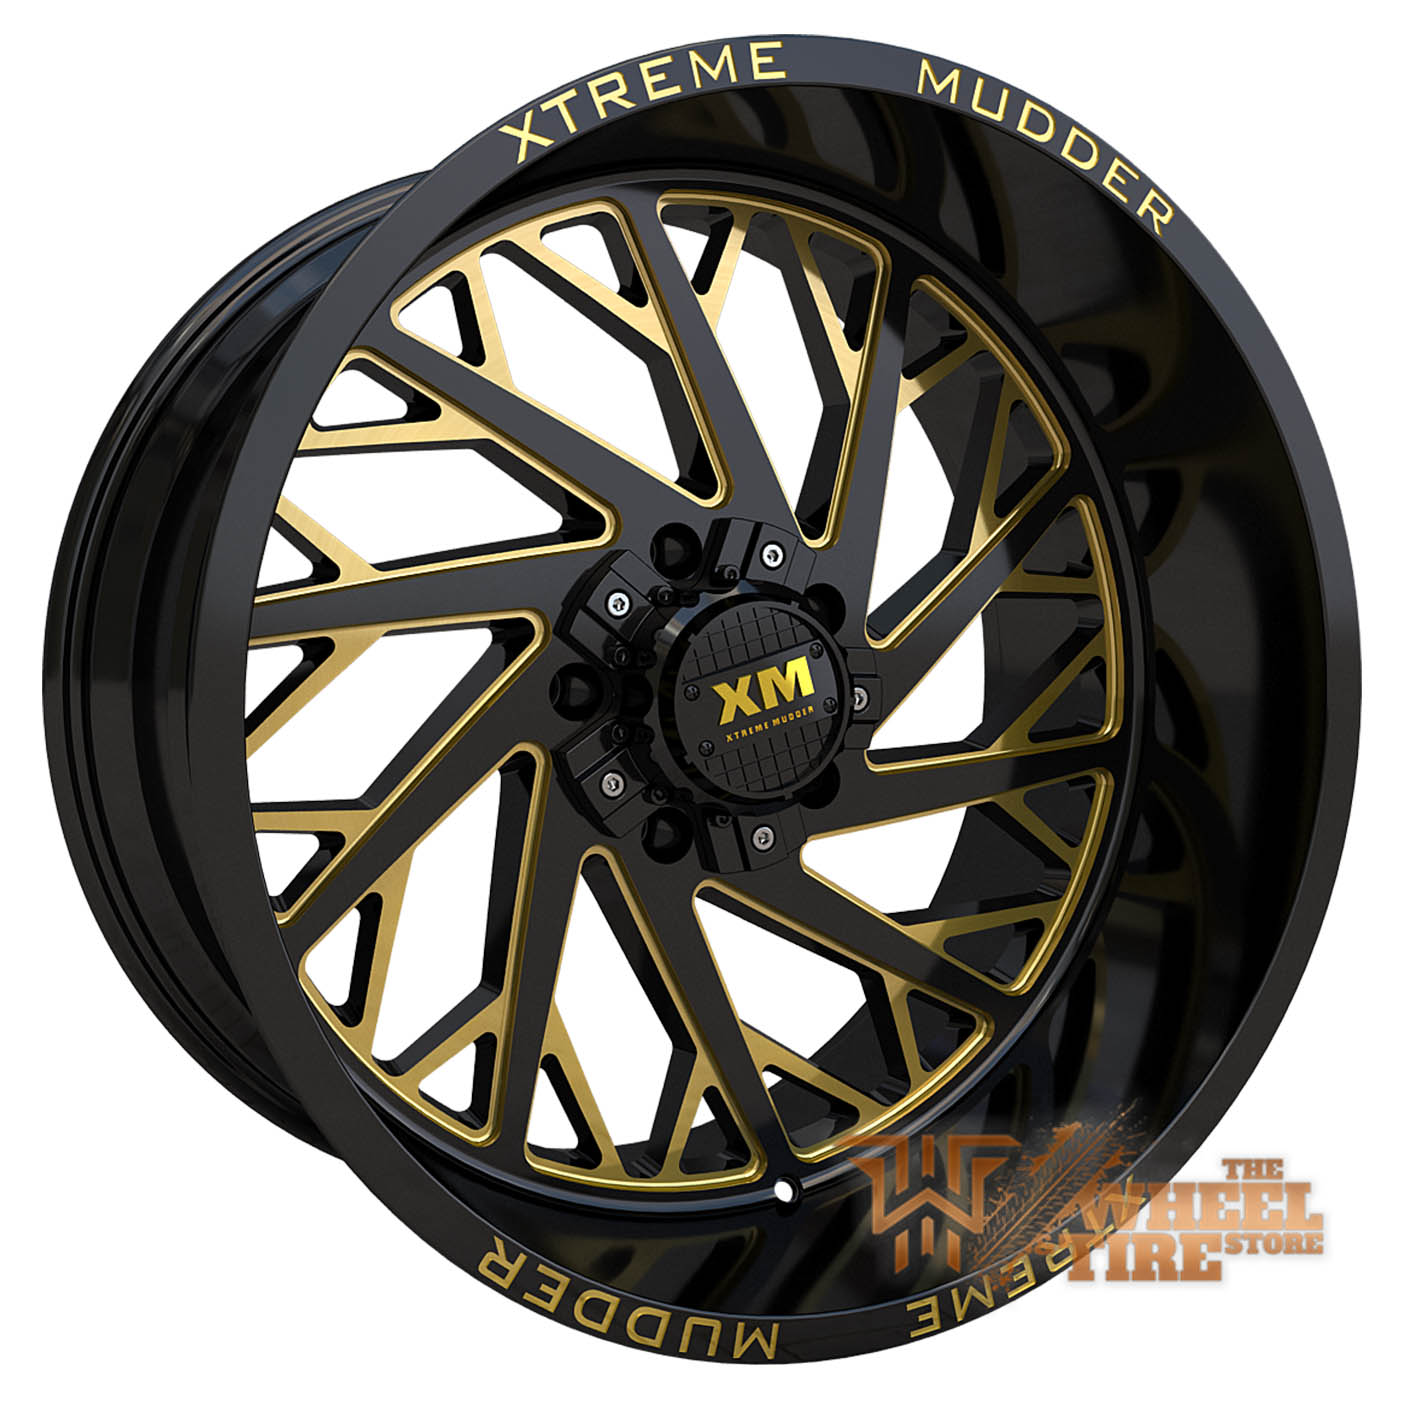 XTREME MUDDER XM-400 Wheel in Gloss Black Yellow Milled (Set of 4)